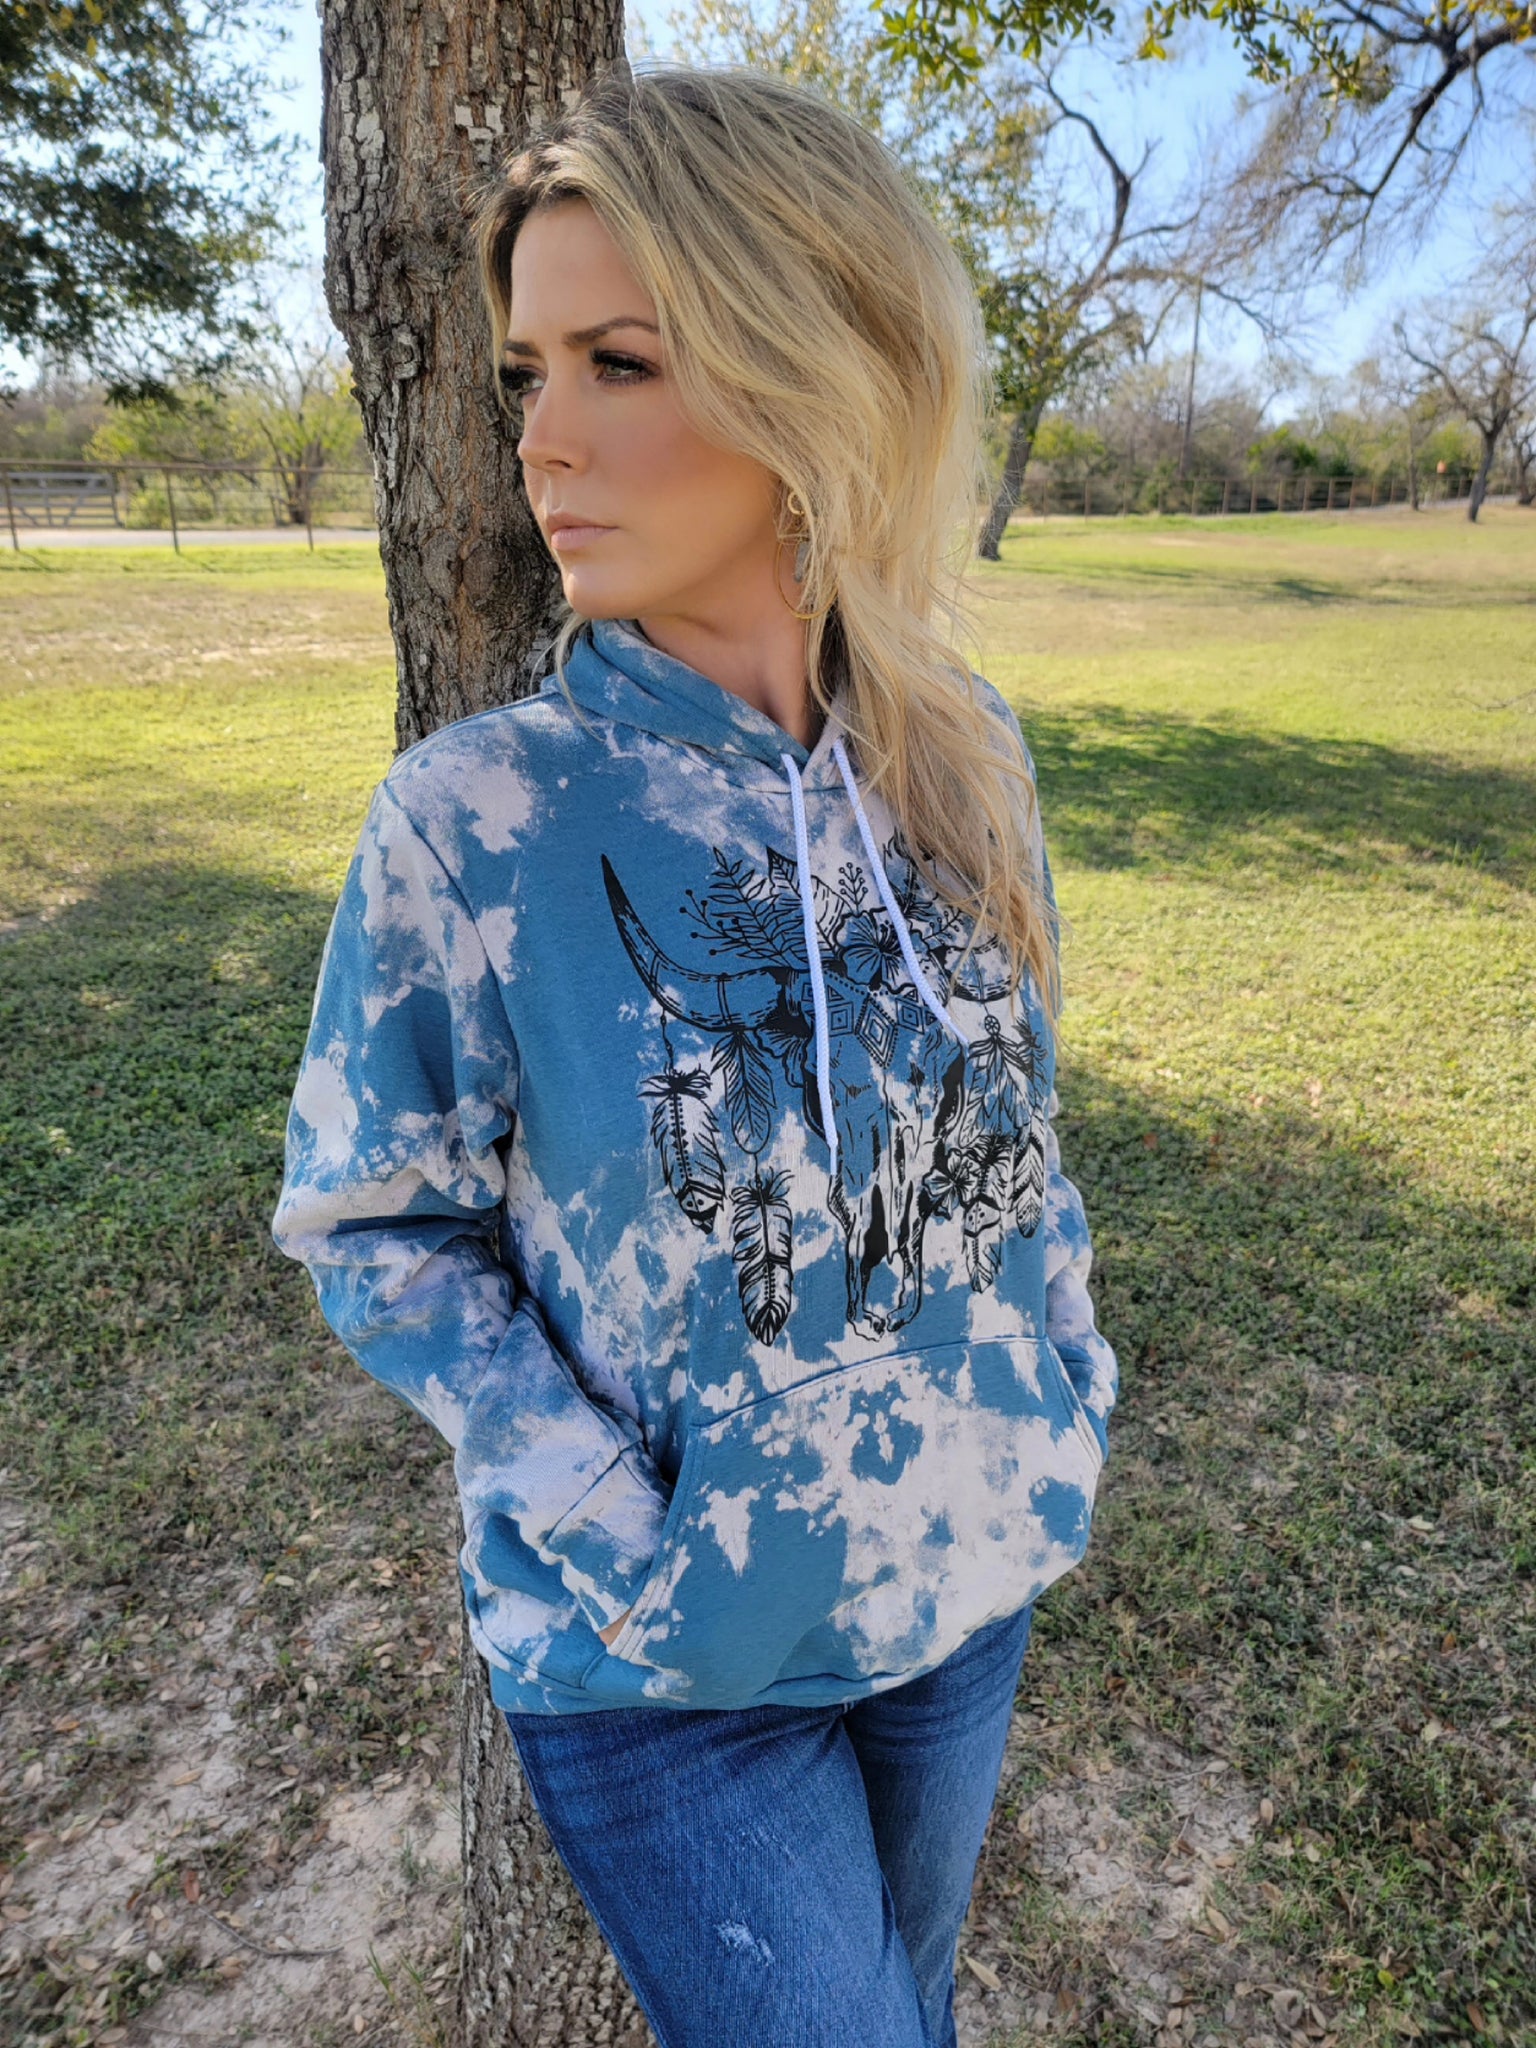 Bleached Feathered Skull Caddaray Hoodie